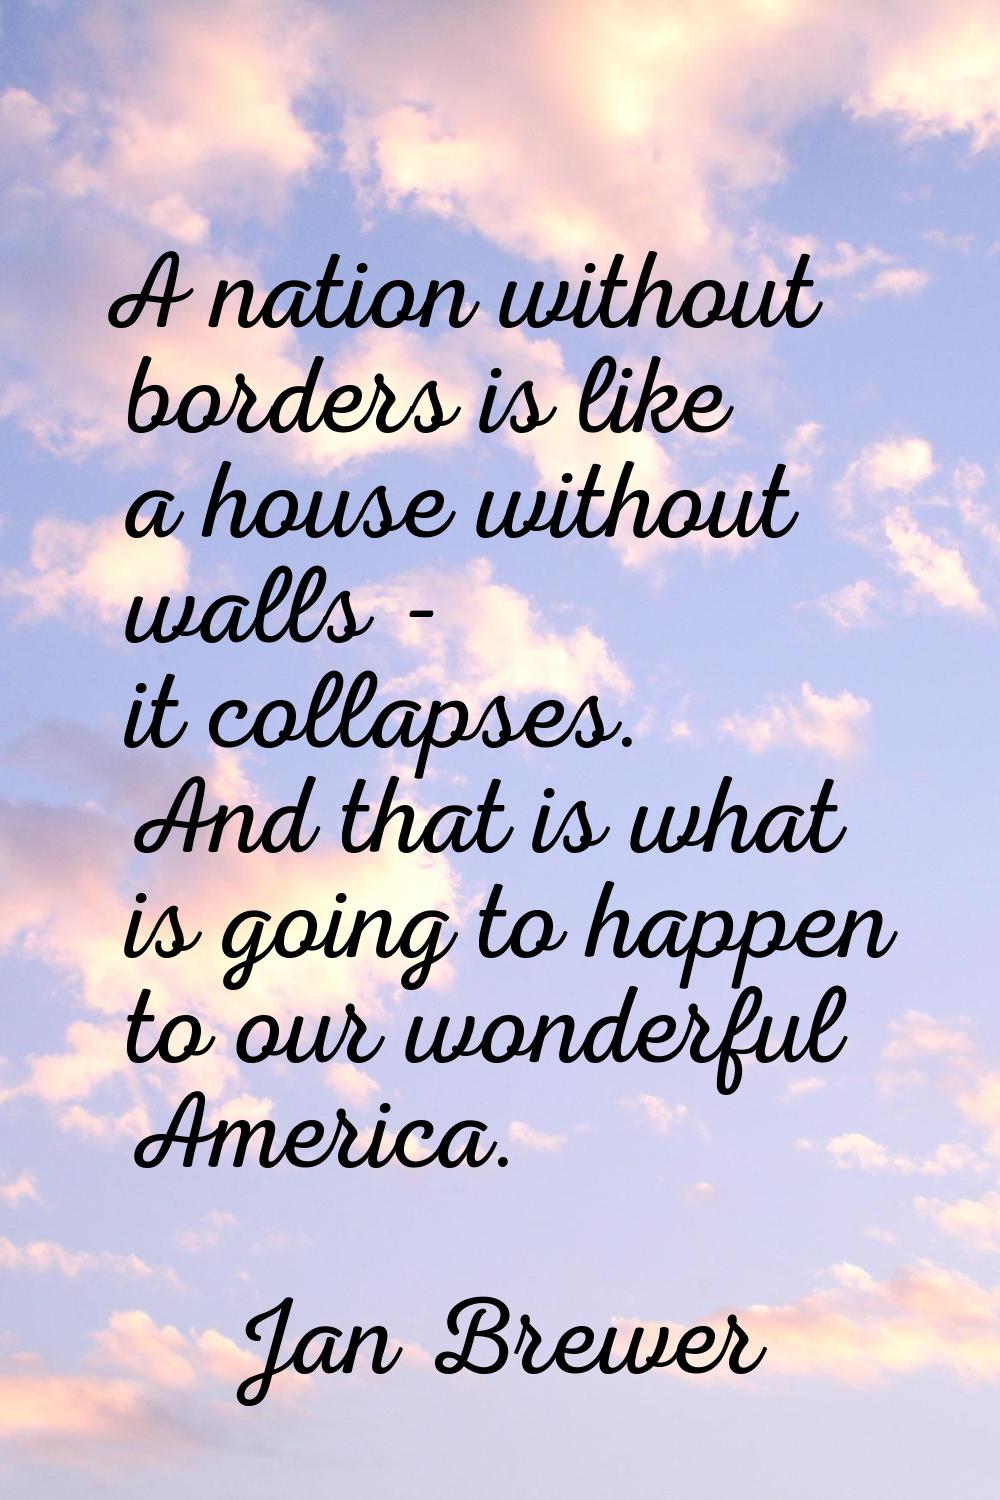 A nation without borders is like a house without walls - it collapses. And that is what is going to